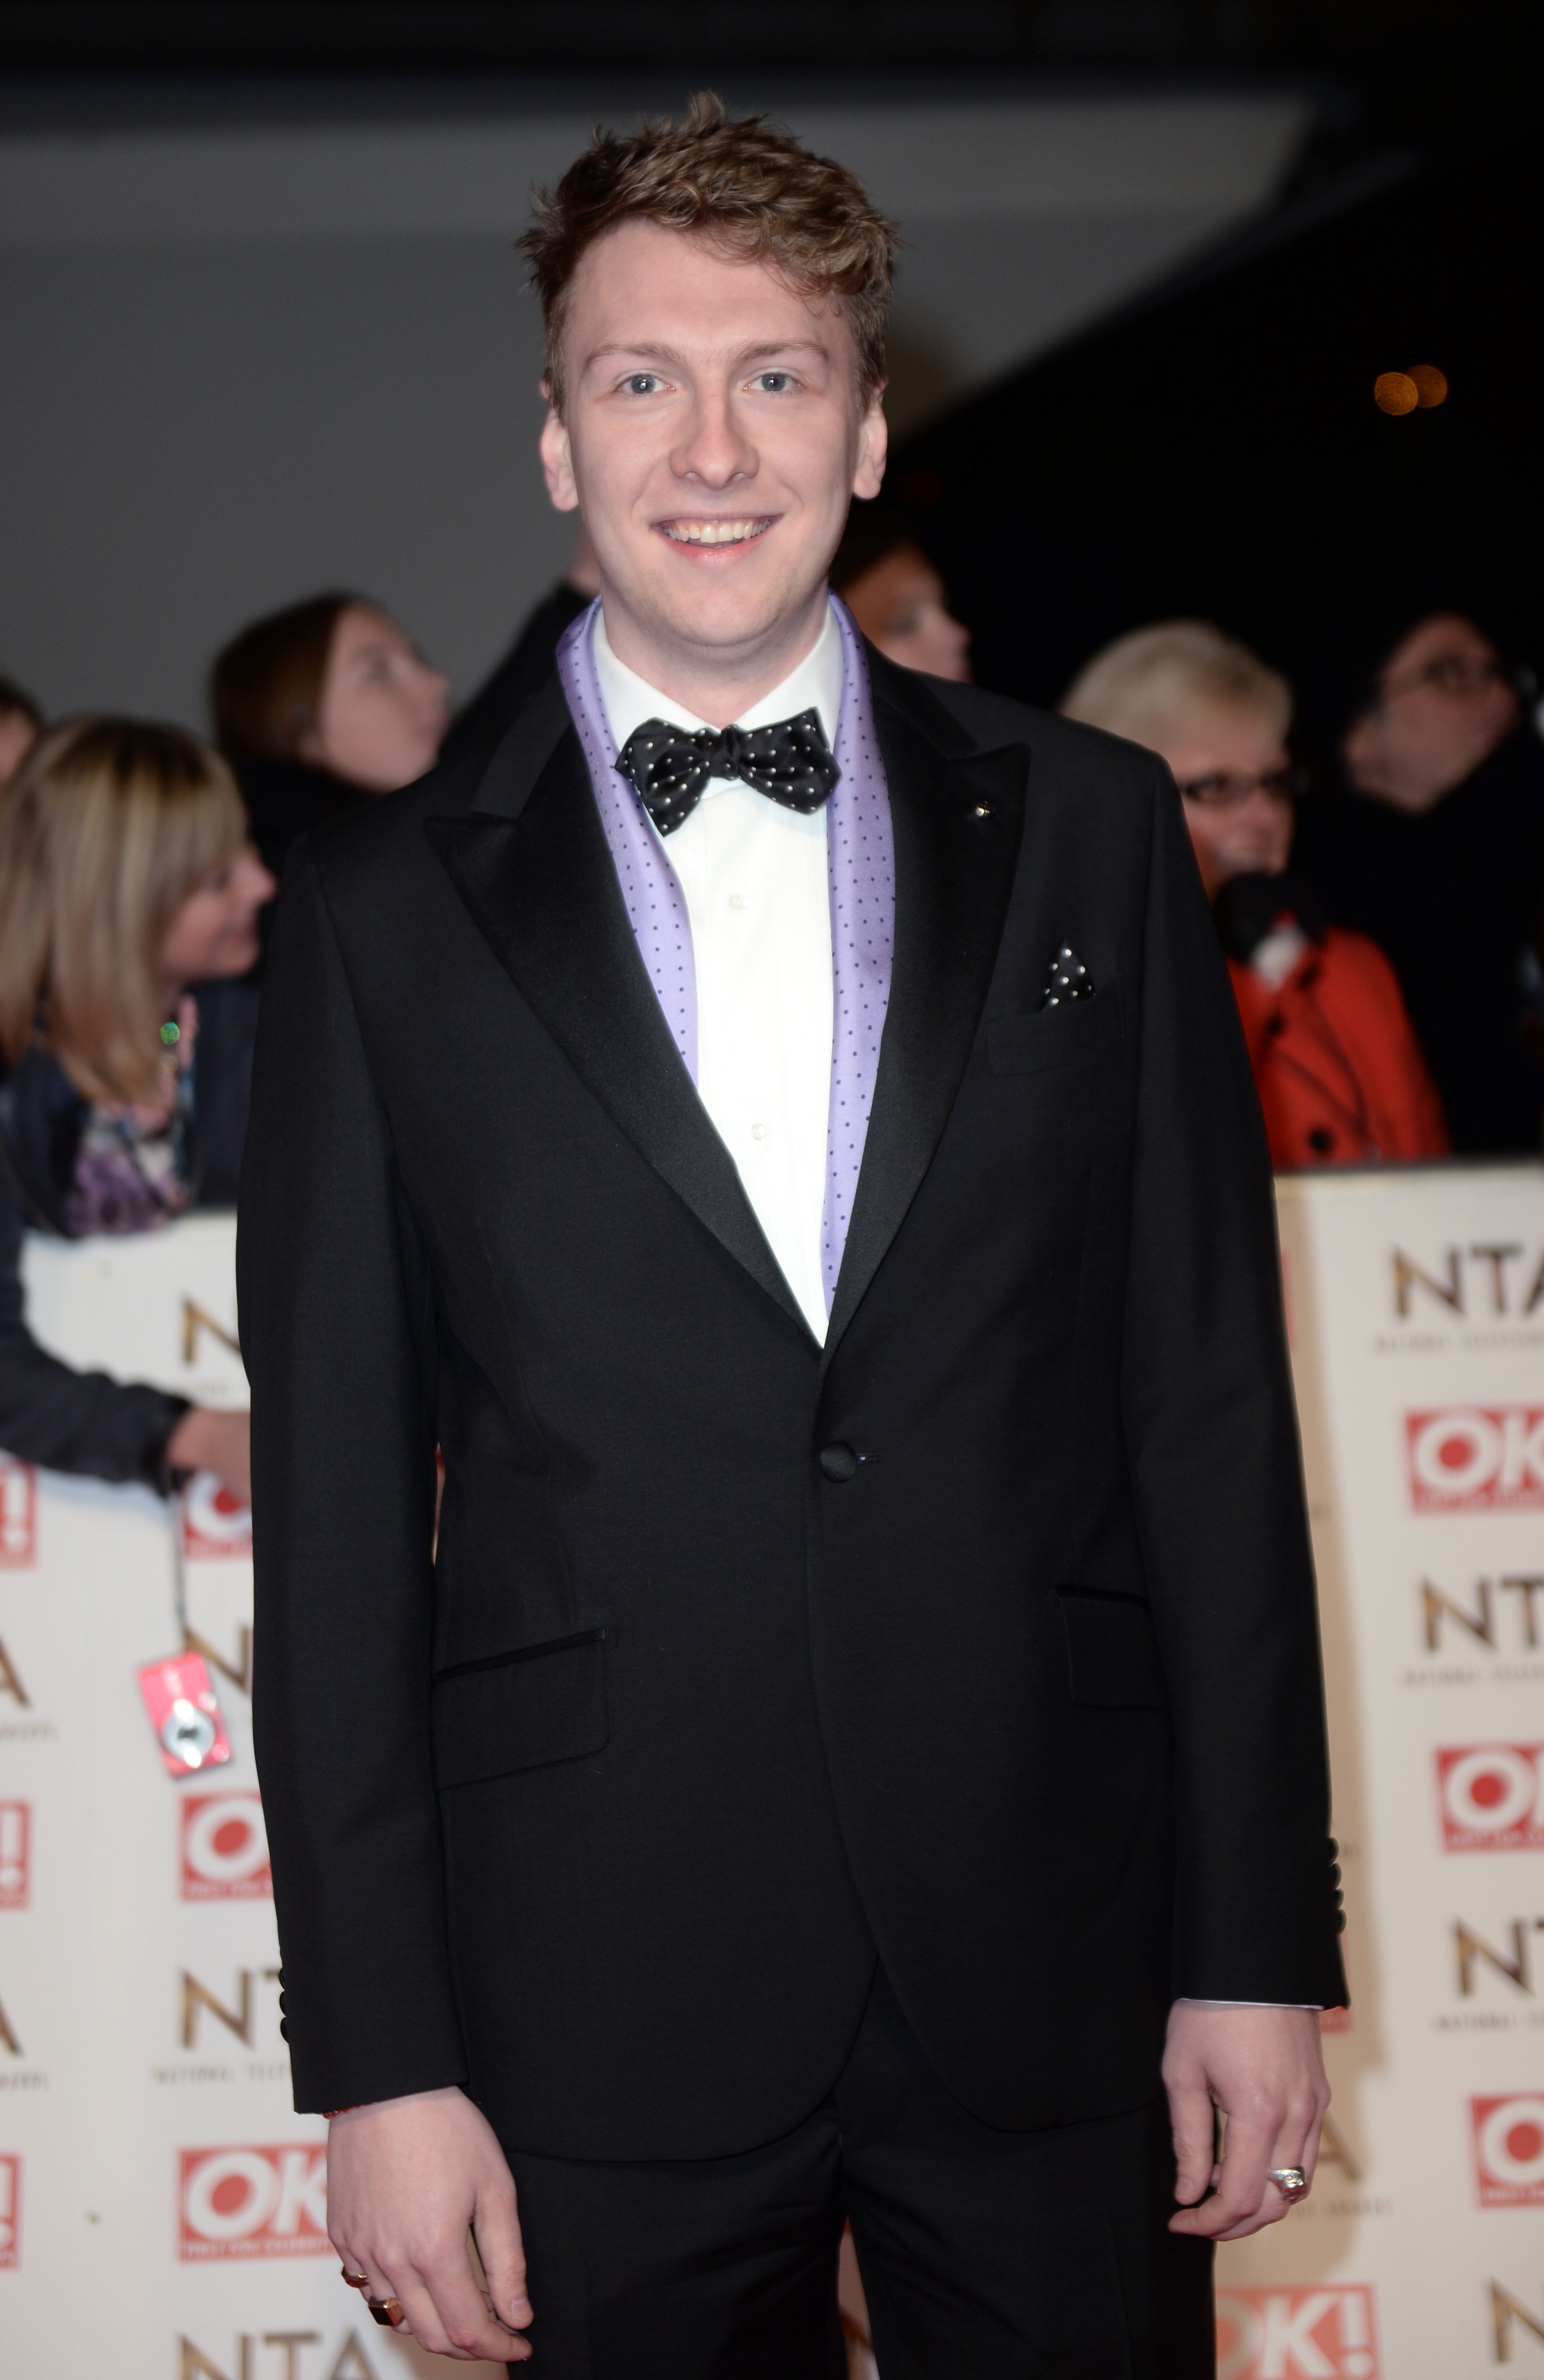 TV presenter and comedian Joe Lycett has said checks on online platforms should be improved to combat scams (Anthony Devlin/PA)